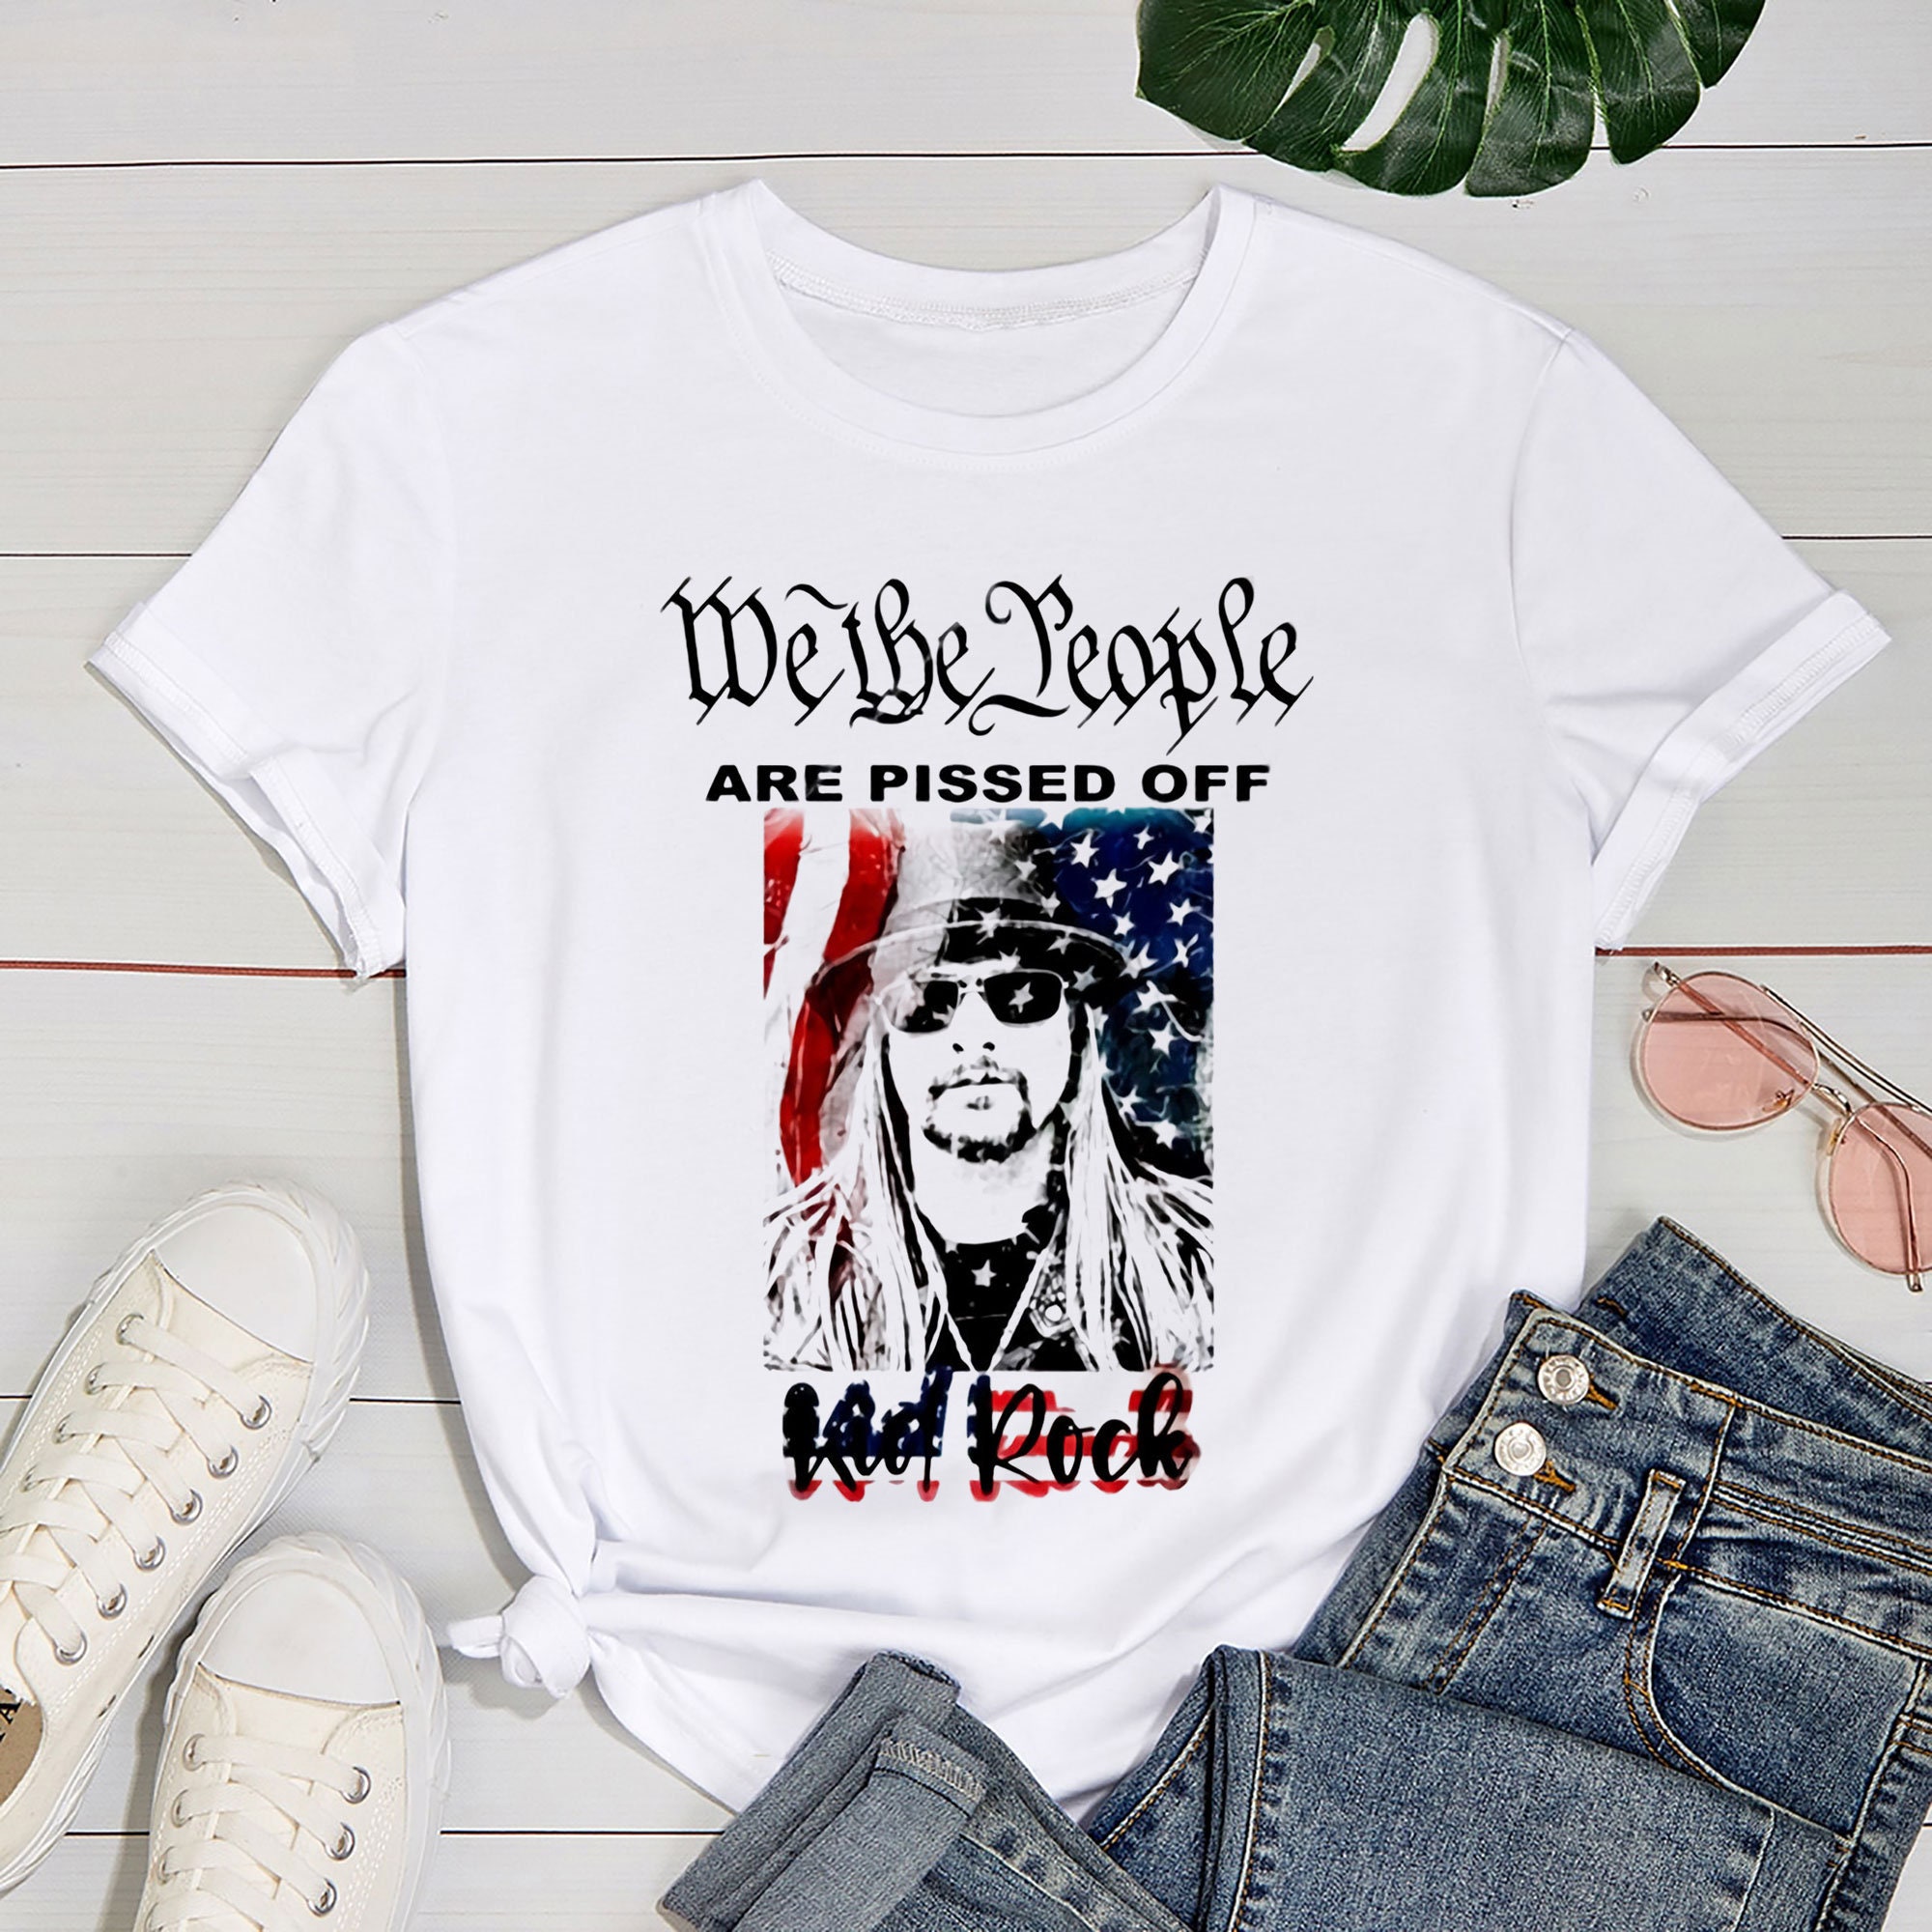 Kid Rock Tshirt, American Rock And Roll Kid Rock, Kid Rock Fans Shirt, We The People Are Pissed Off Kid Rock